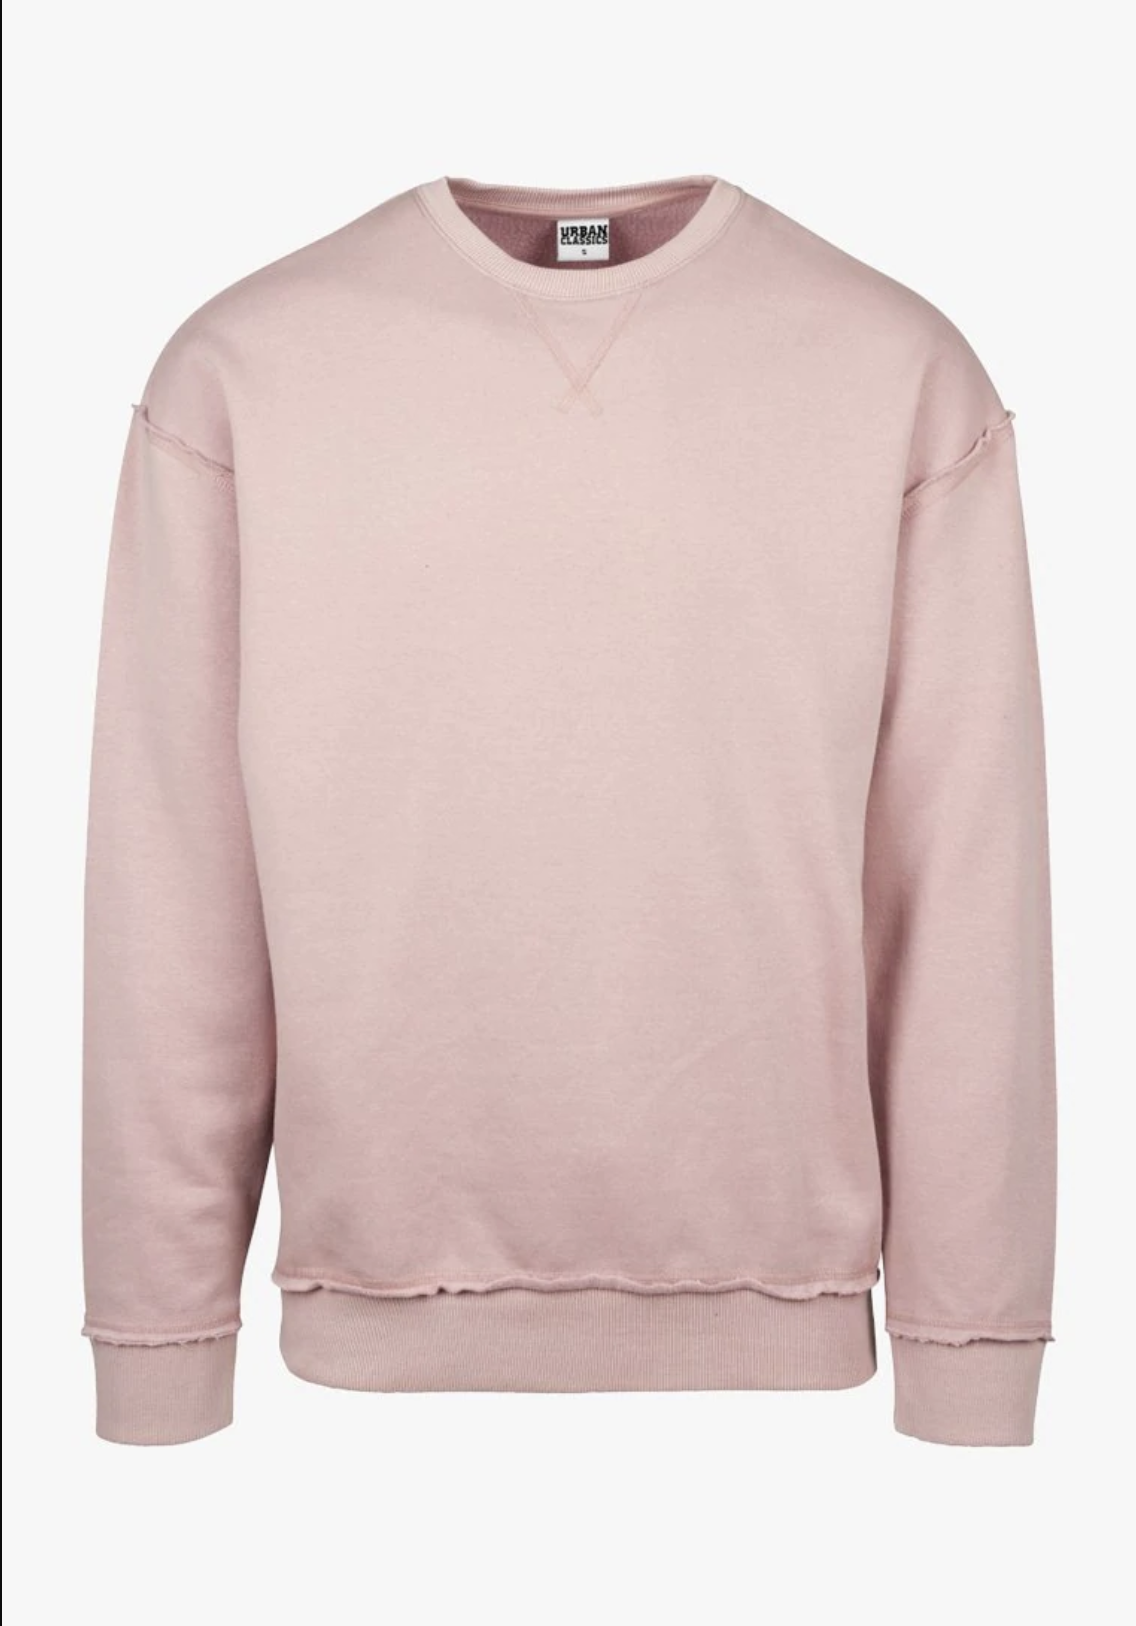 Aktuelle Modetrends: Pastell-Sweater.